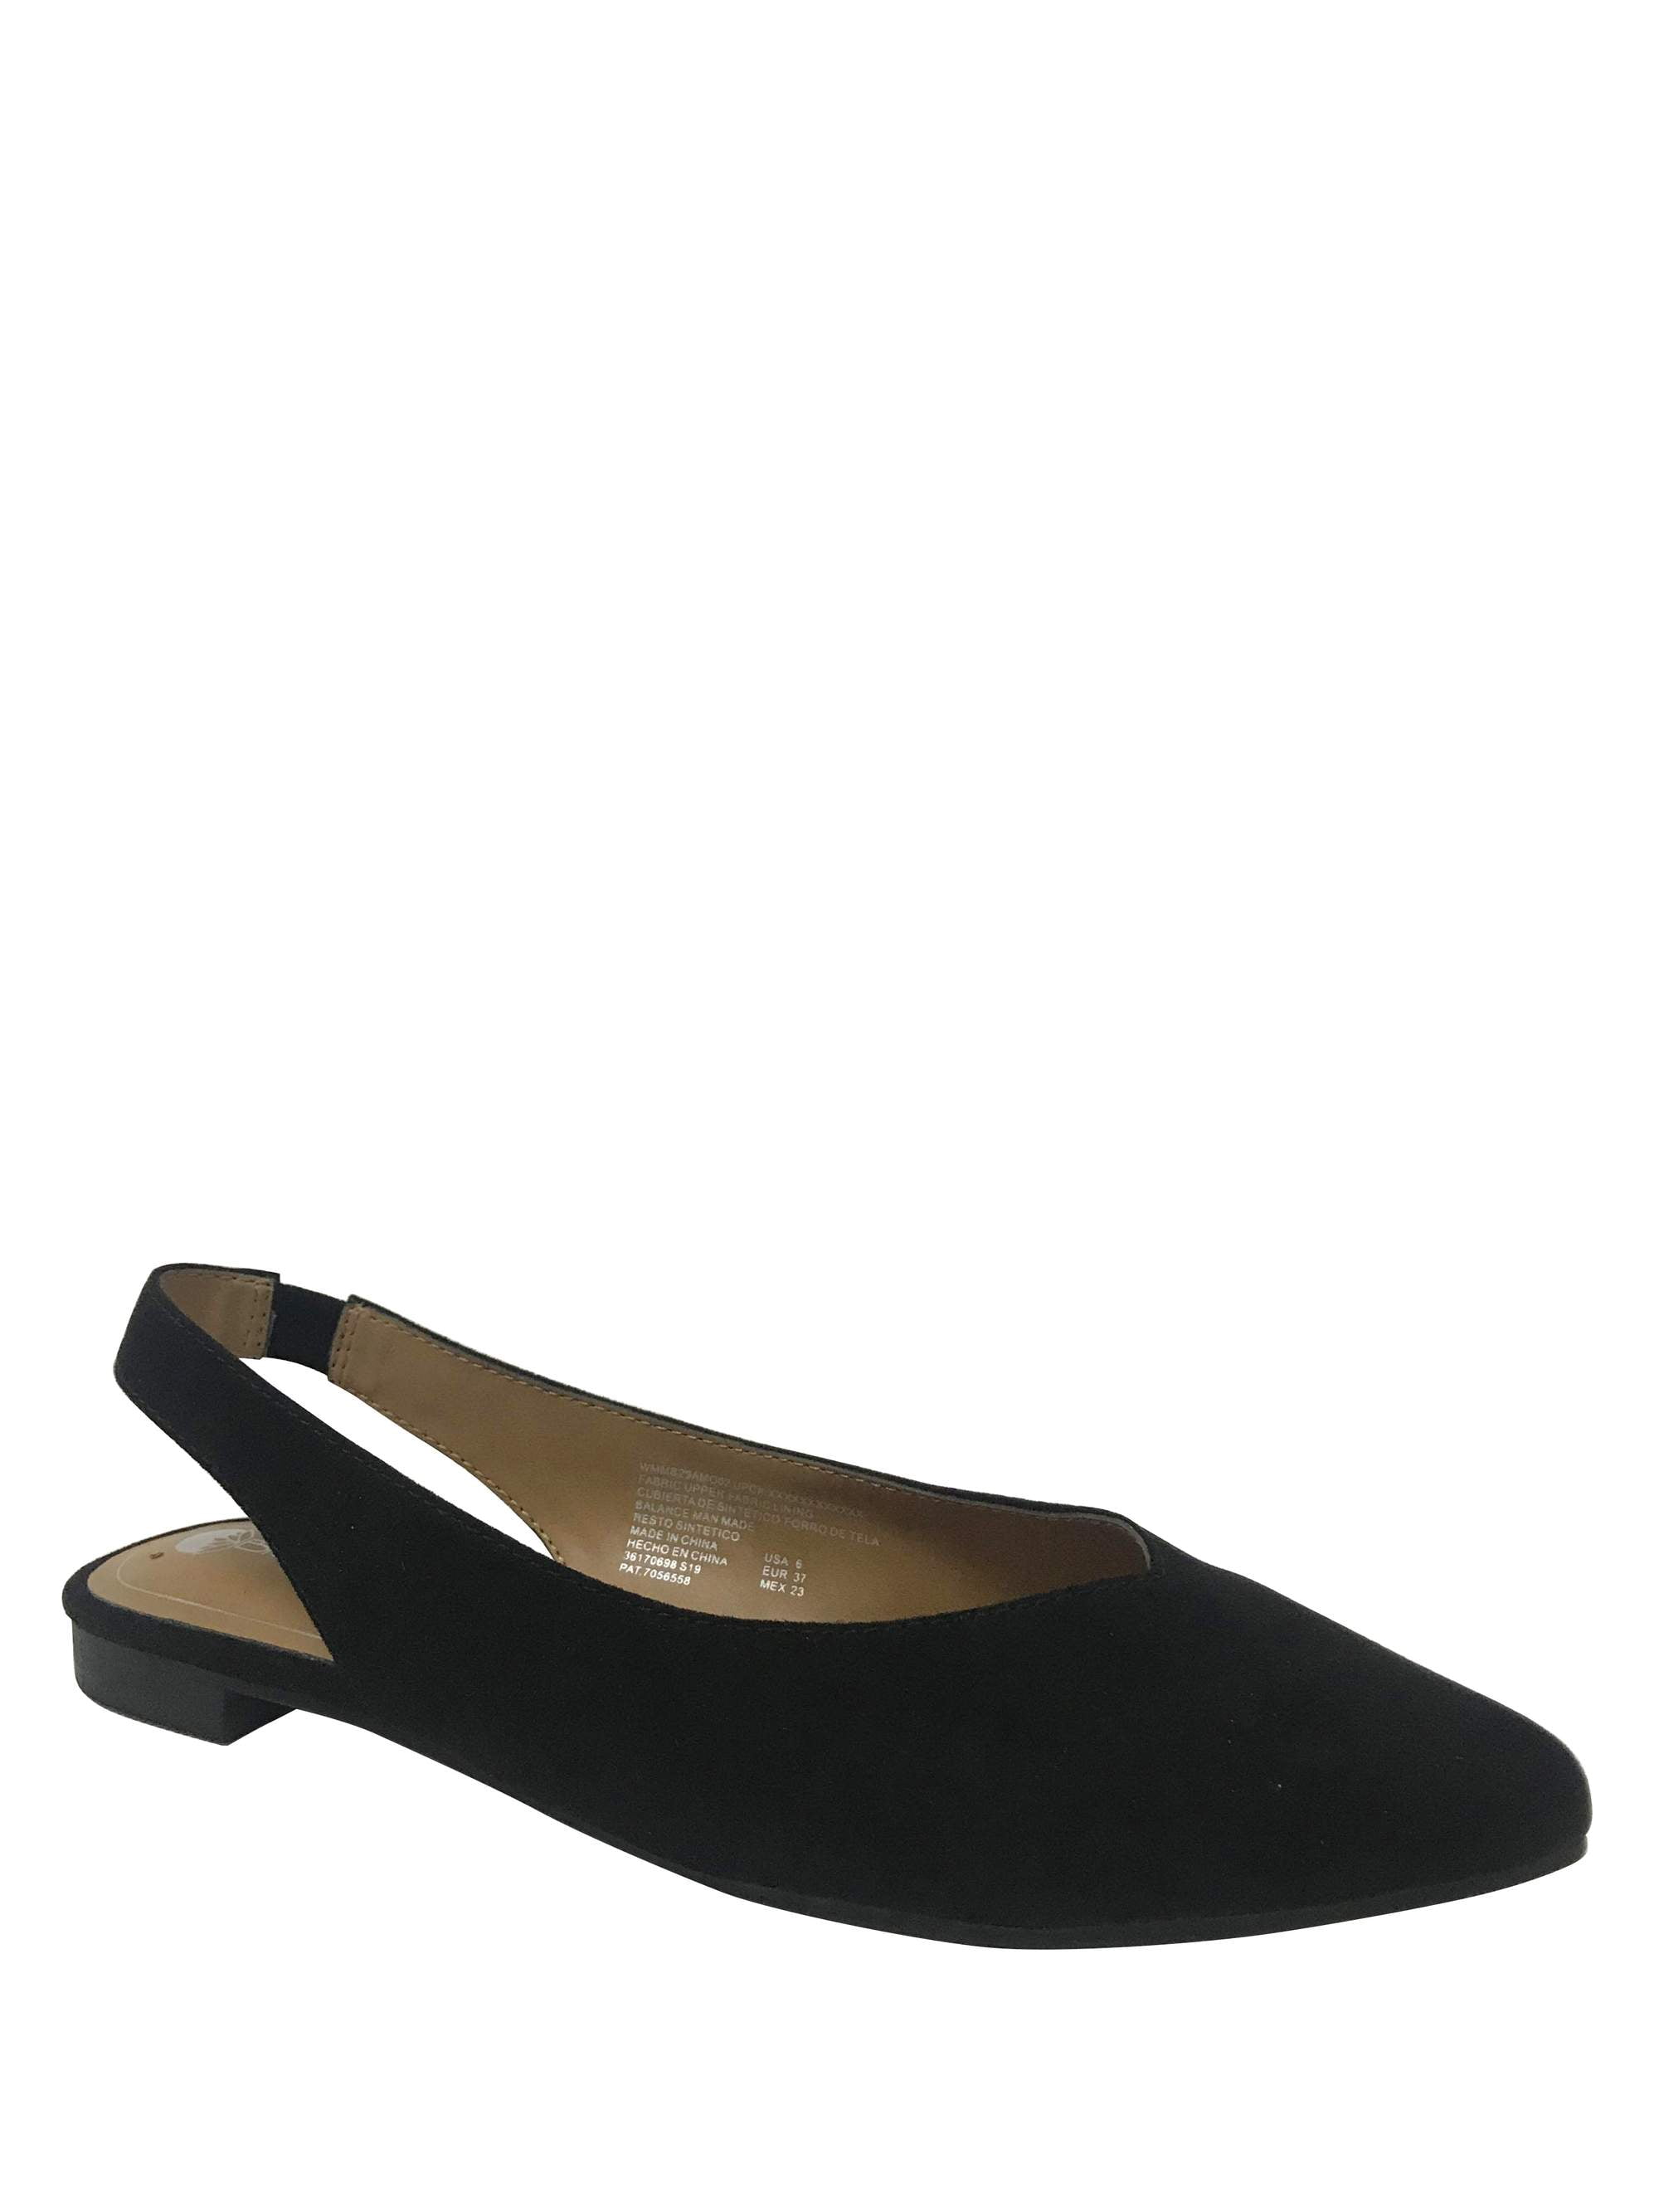 Big Buddha Women's Black Closed Toe Flats Faux Suede Top with Back Strap 